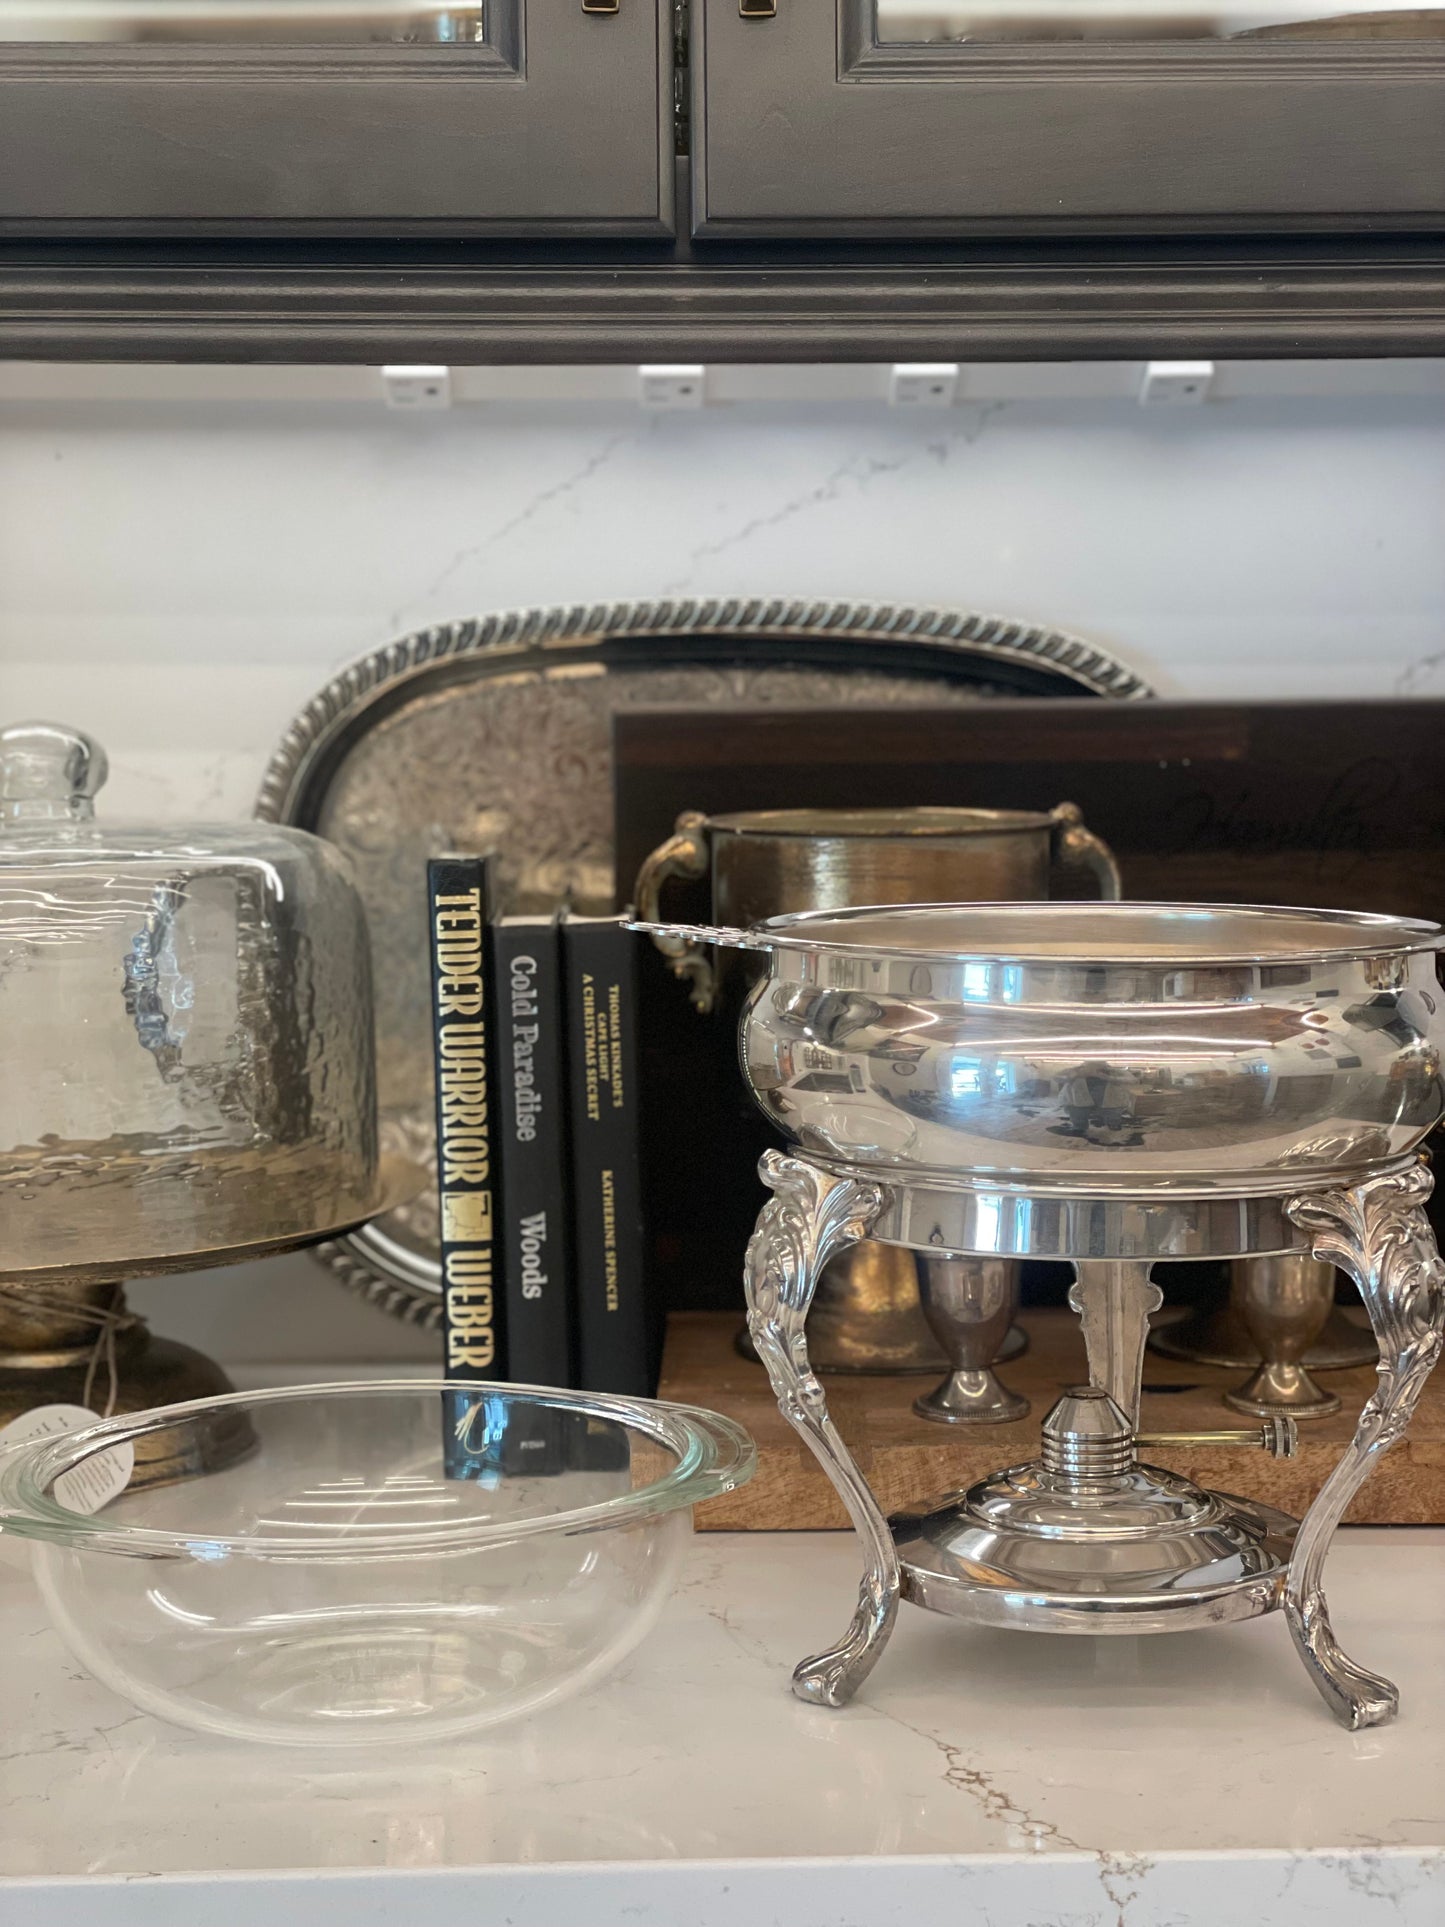 Vintage Silverplate Chafing Dish